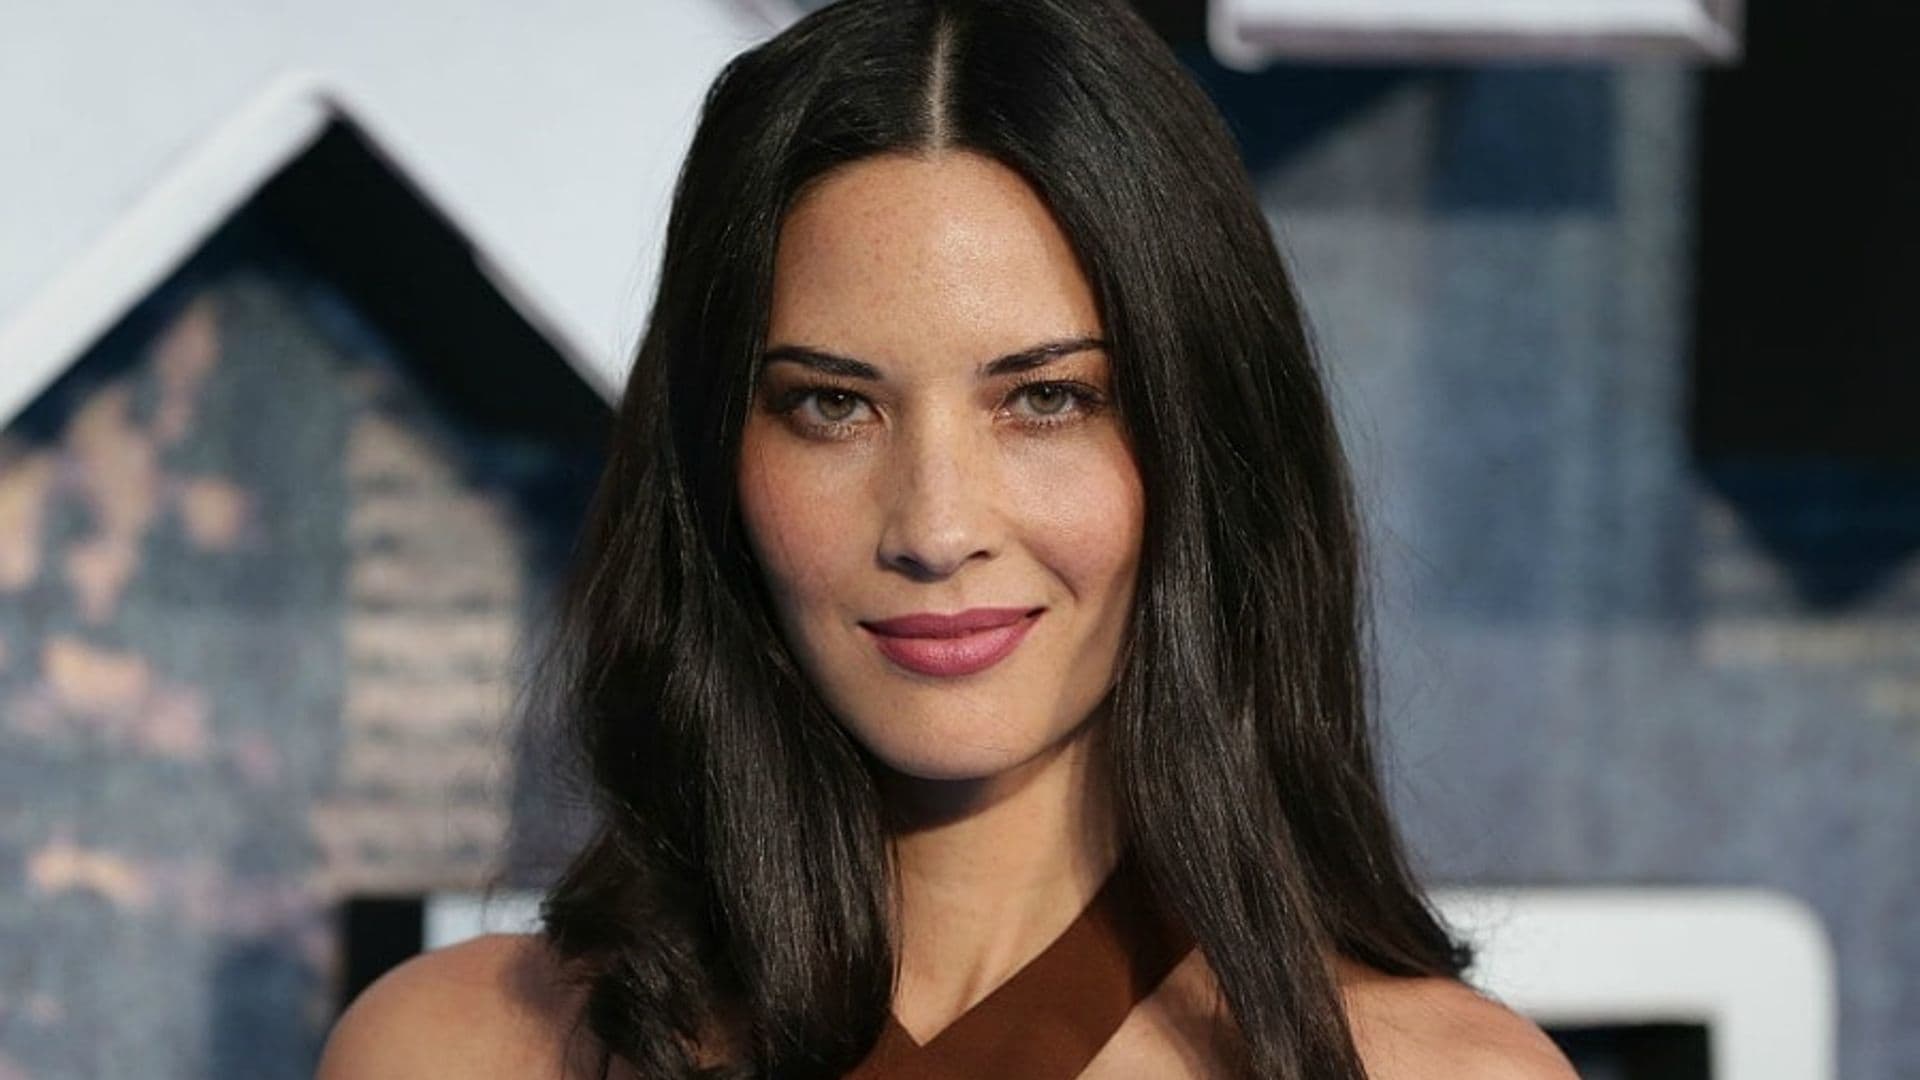 See what happened when Olivia Munn adopted Gisele Bündchen's diet